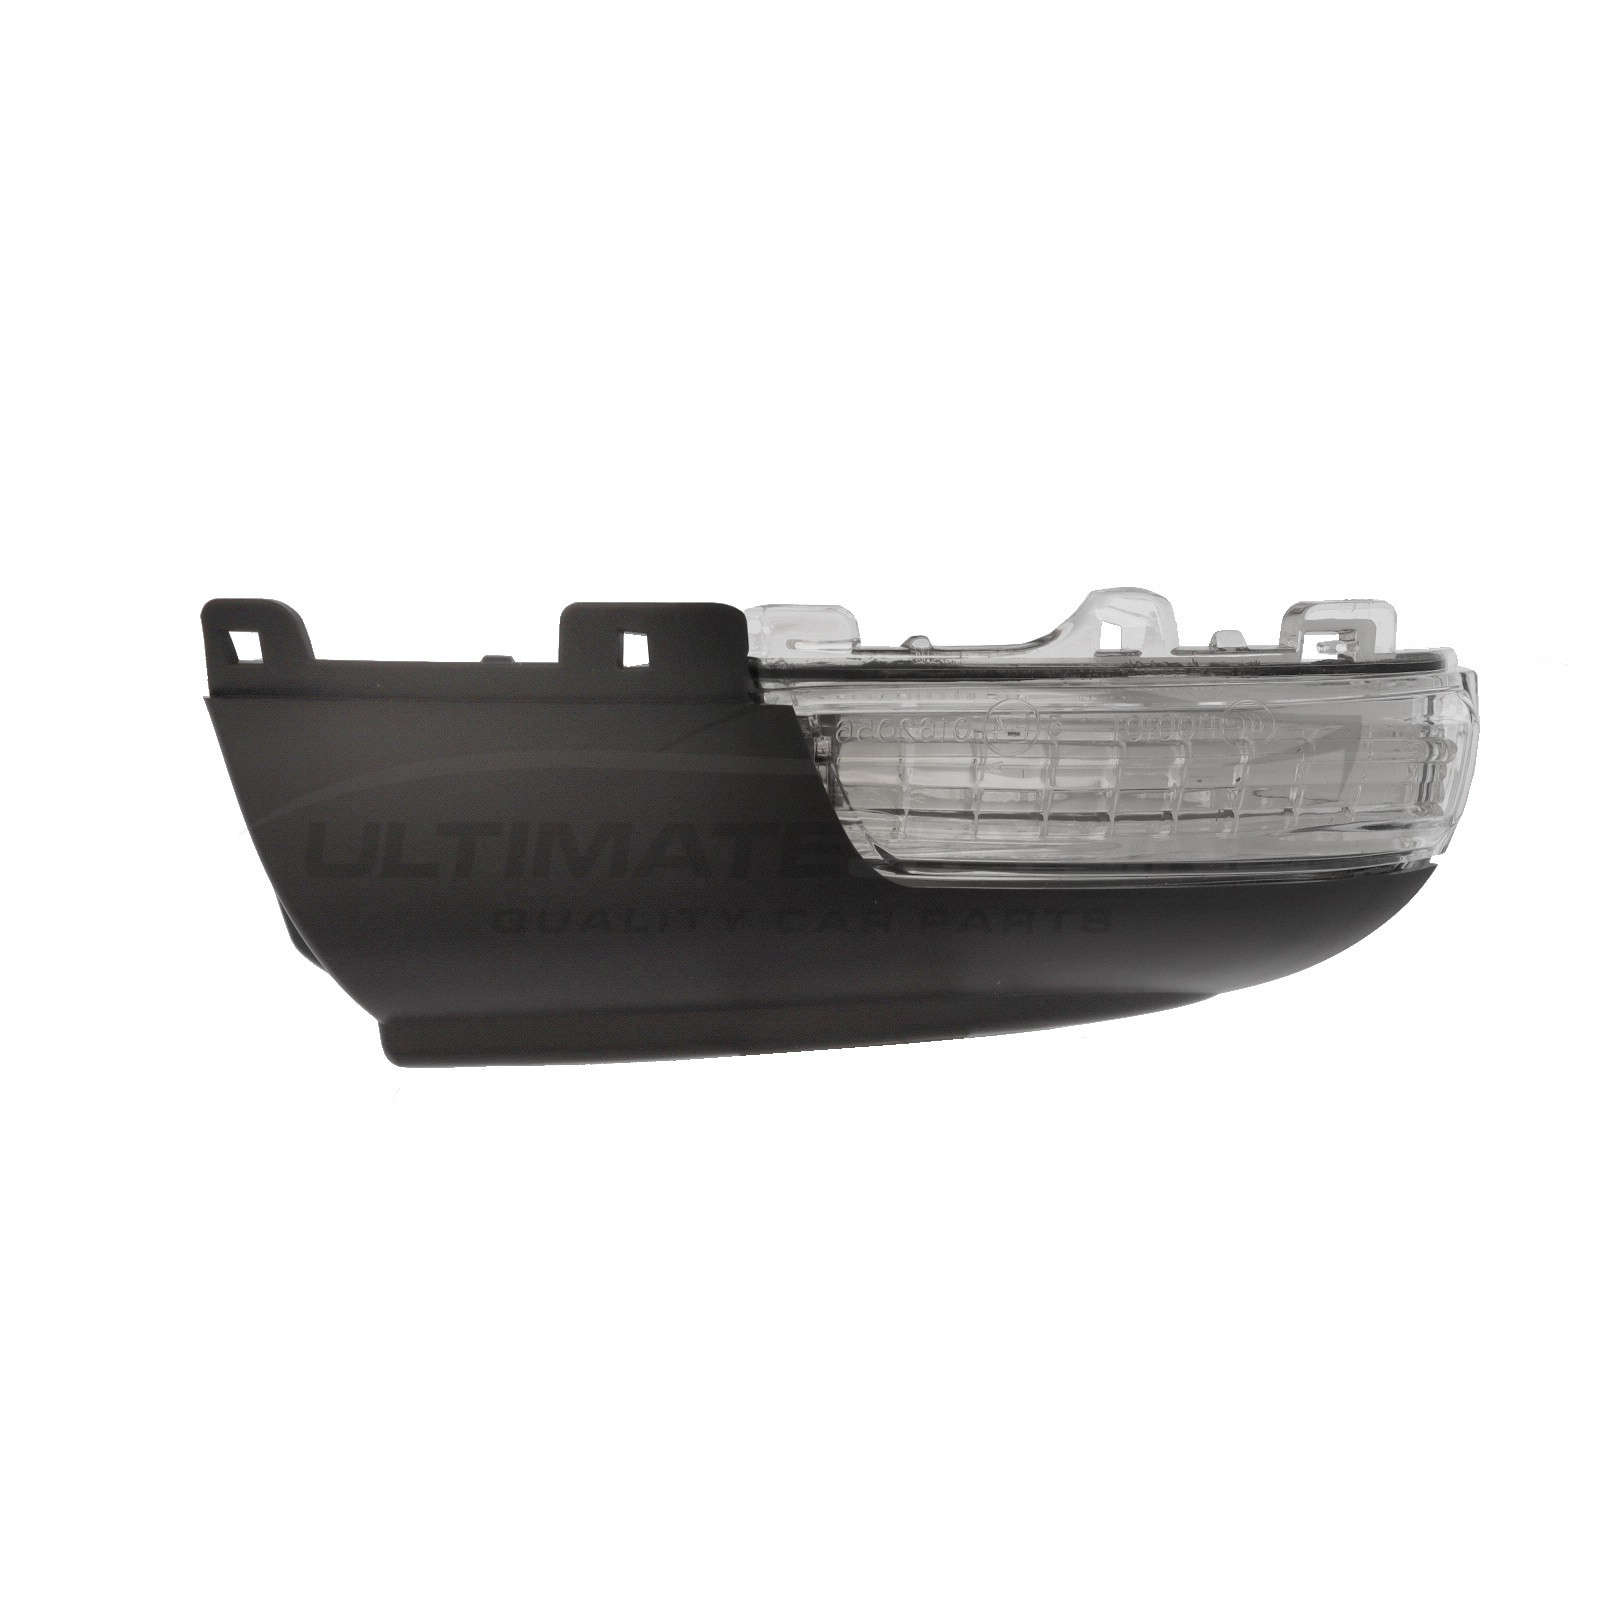 Seat Alhambra 2010-2021, VW Sharan 2010-2022, VW Tiguan 2008-2017 Clear LED Mirror Indicator To Suit Mirror Without Puddle Lamp - Includes Plastic Base Passenger Side (LH)